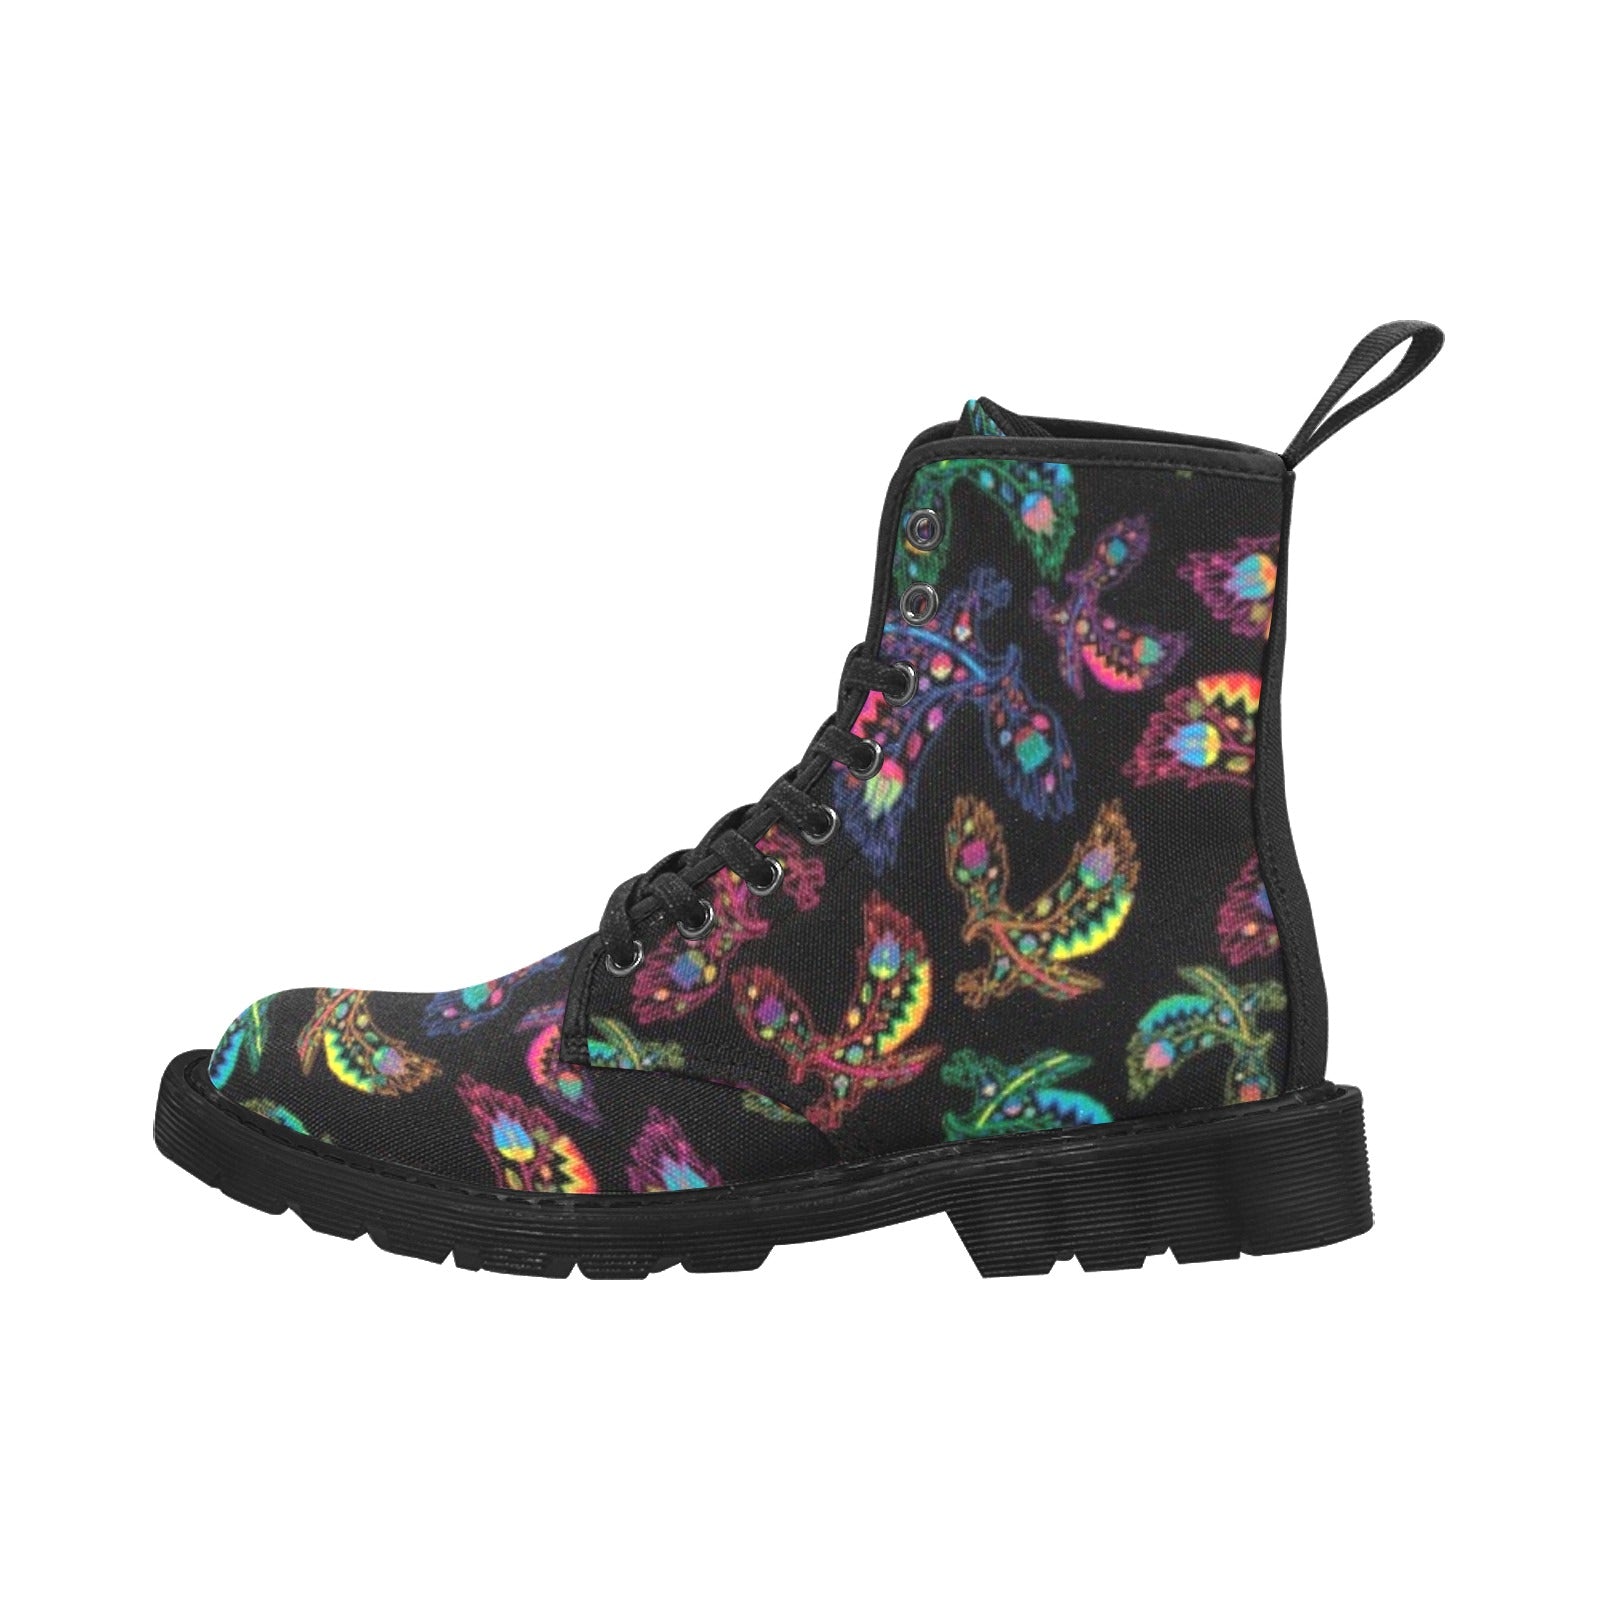 Neon Floral Eagles Boots for Women (Black)